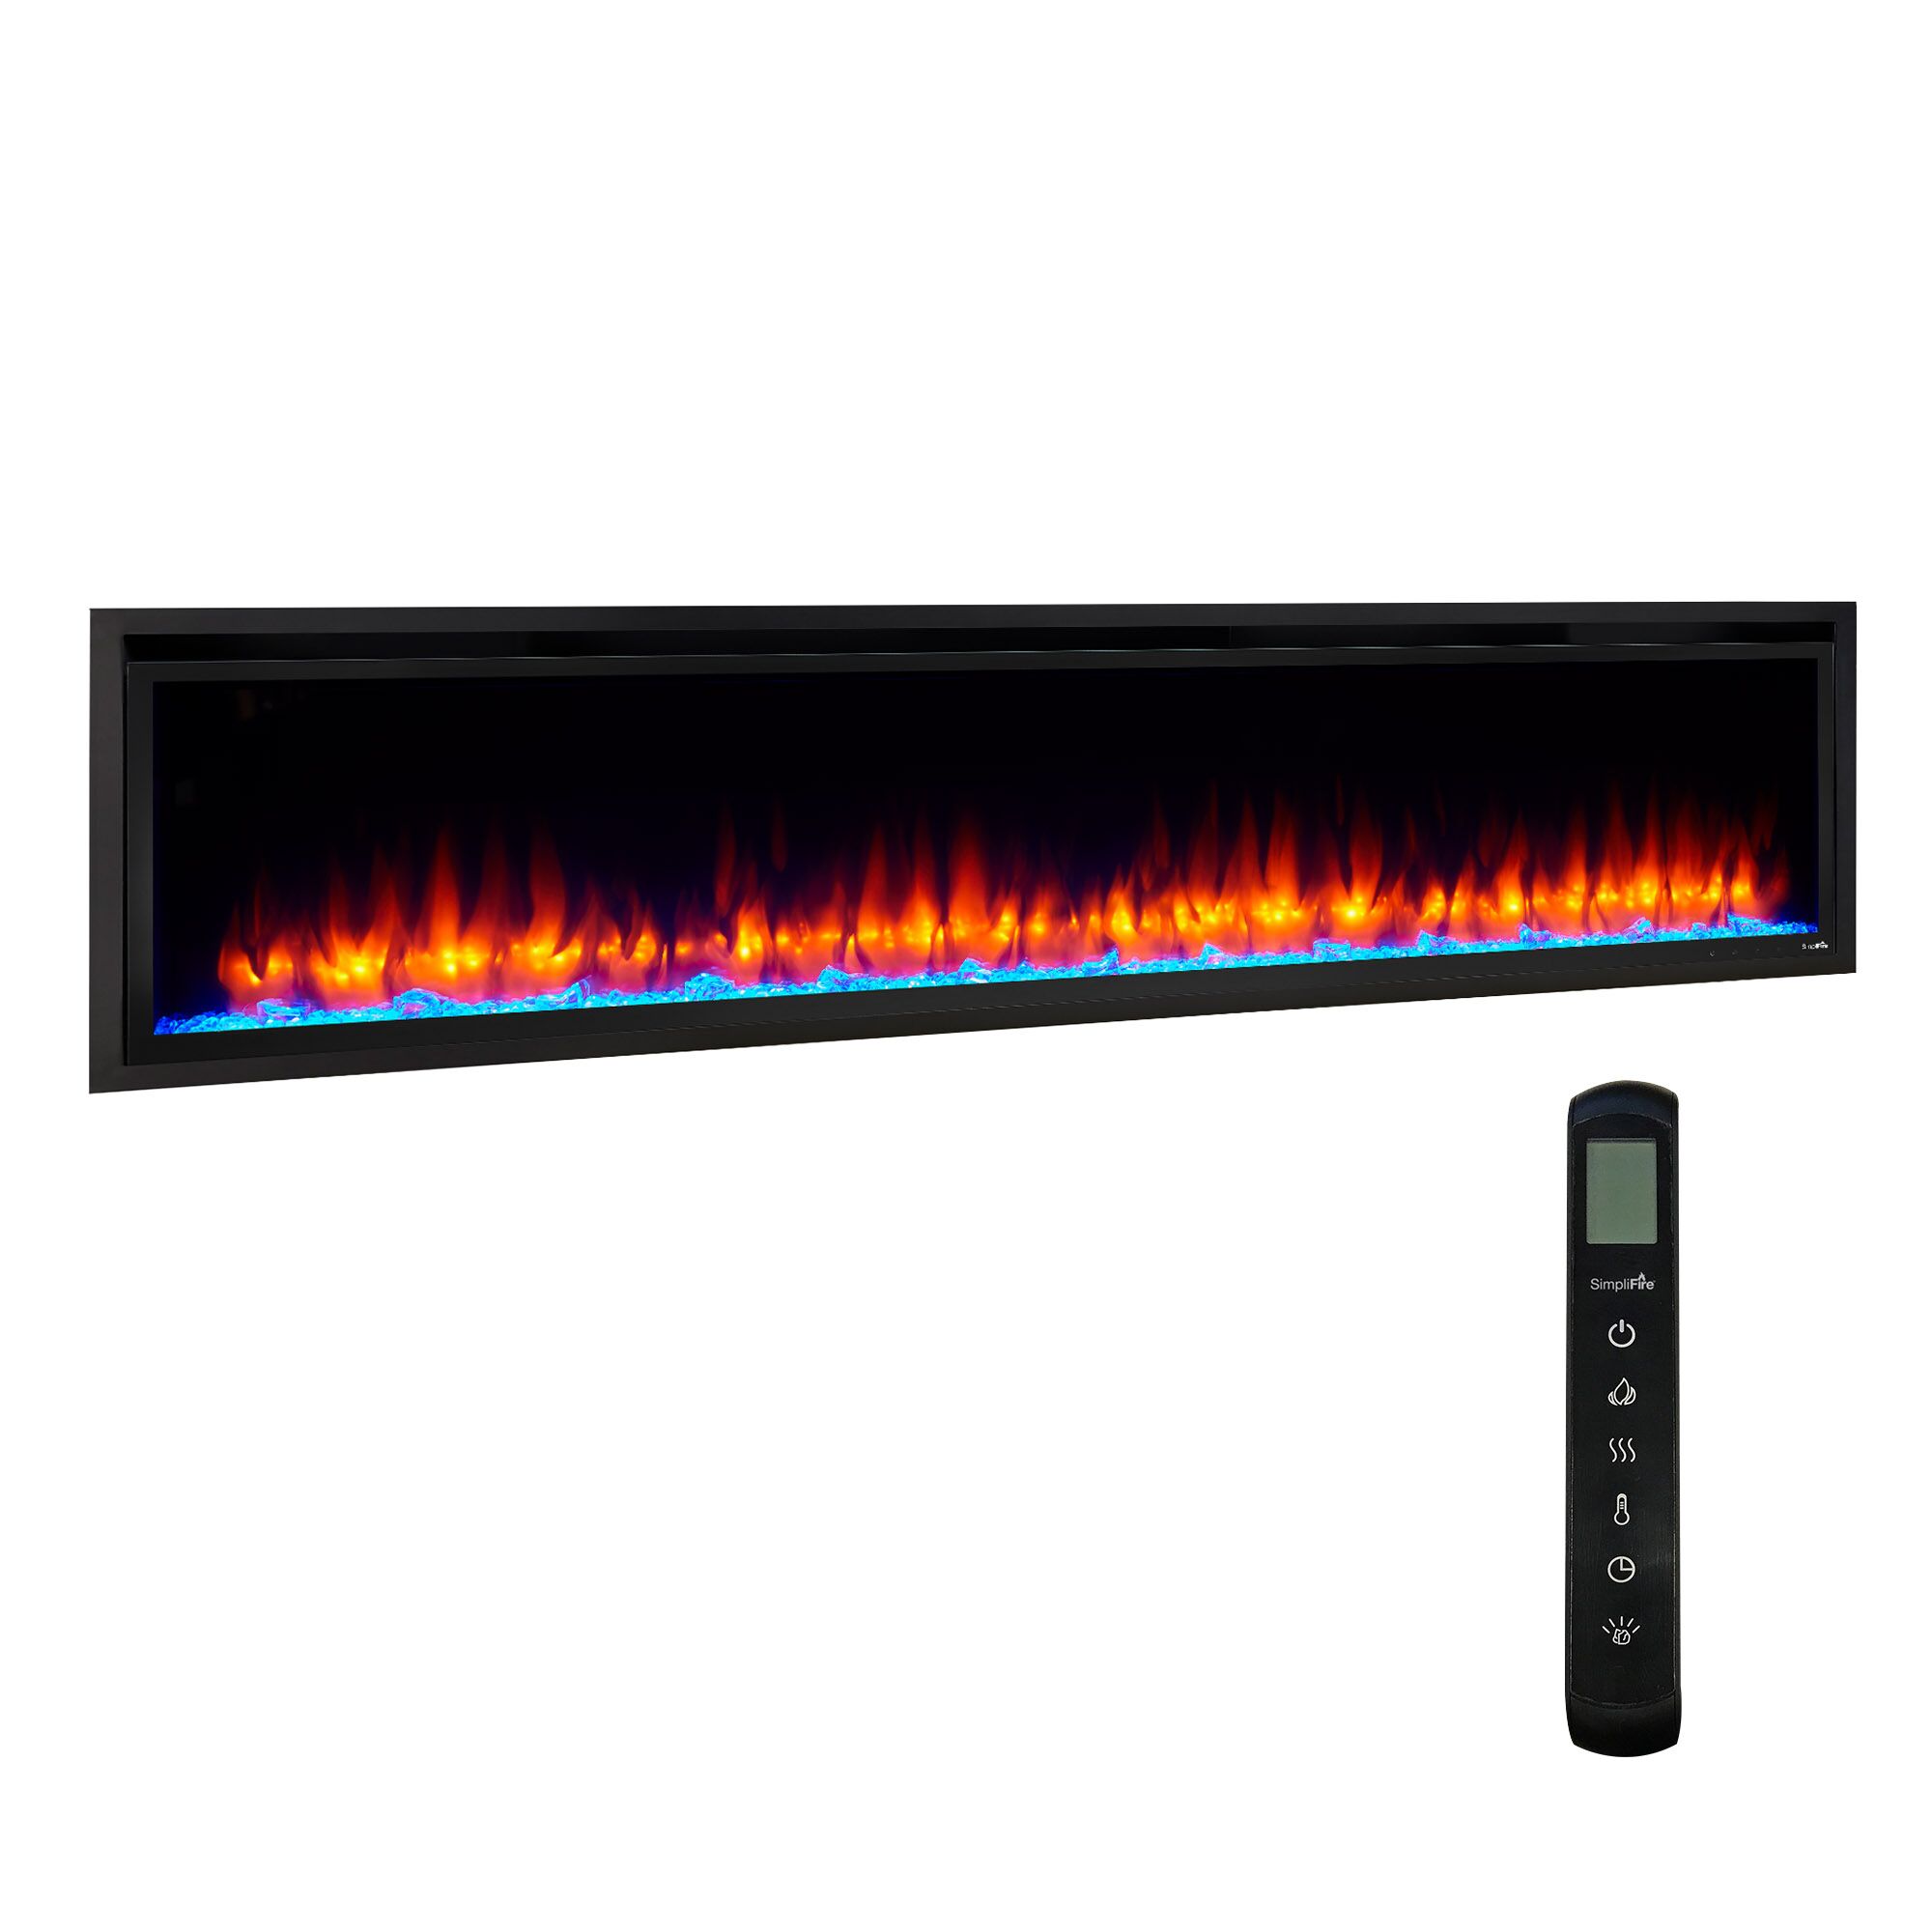 72 inch allusion platinum electric fireplace thumbnail image